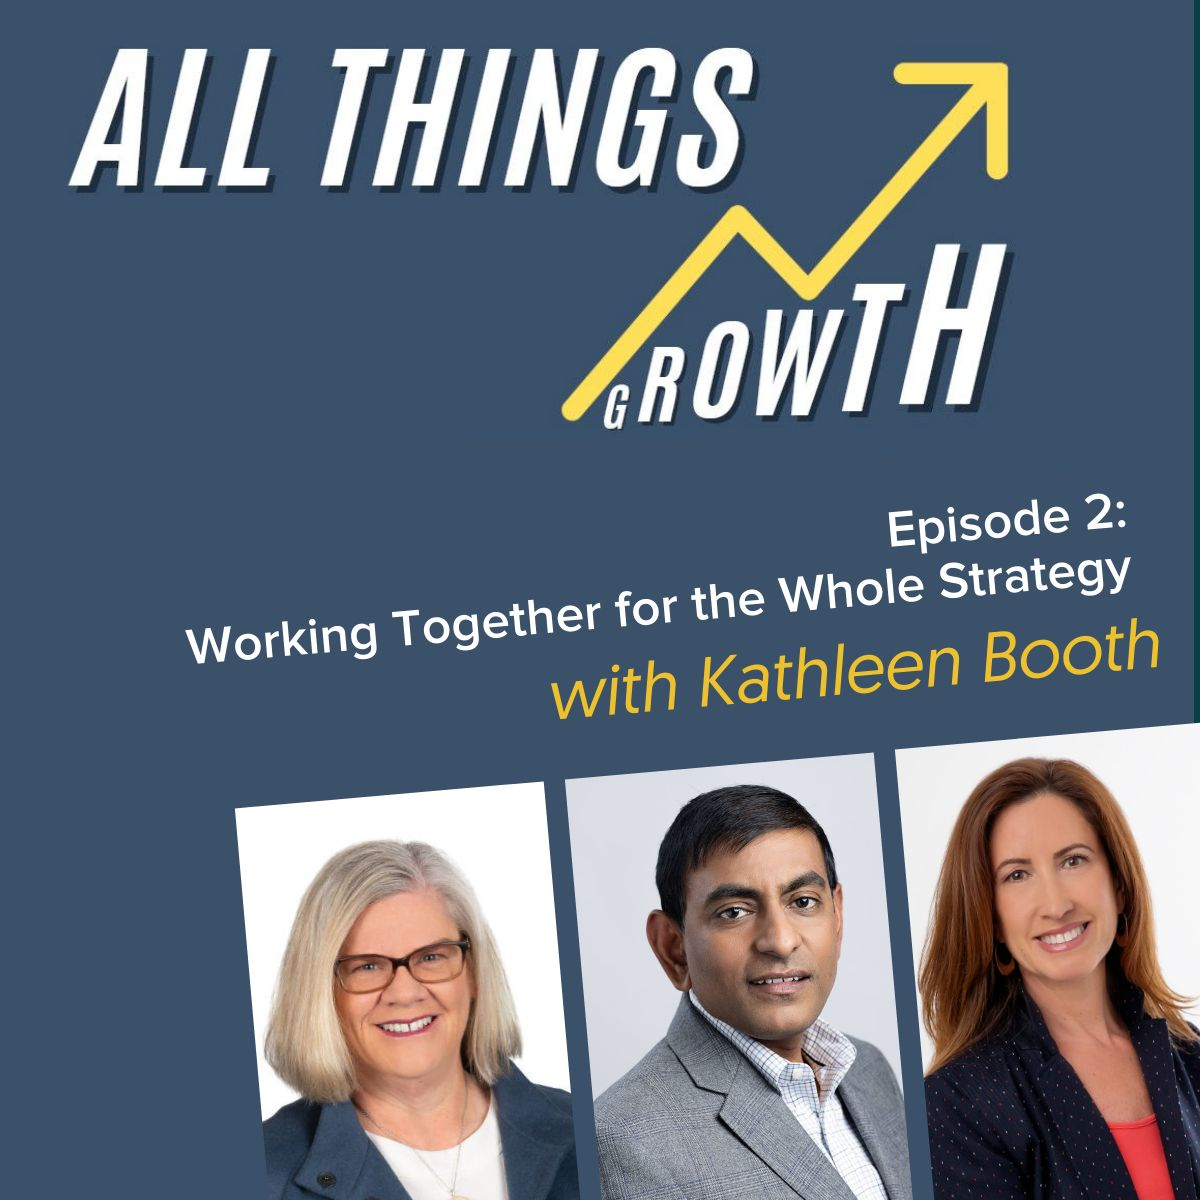 All things growth: Episode 2 is: Driving Revenue Through Alignment with Kathleen Booth